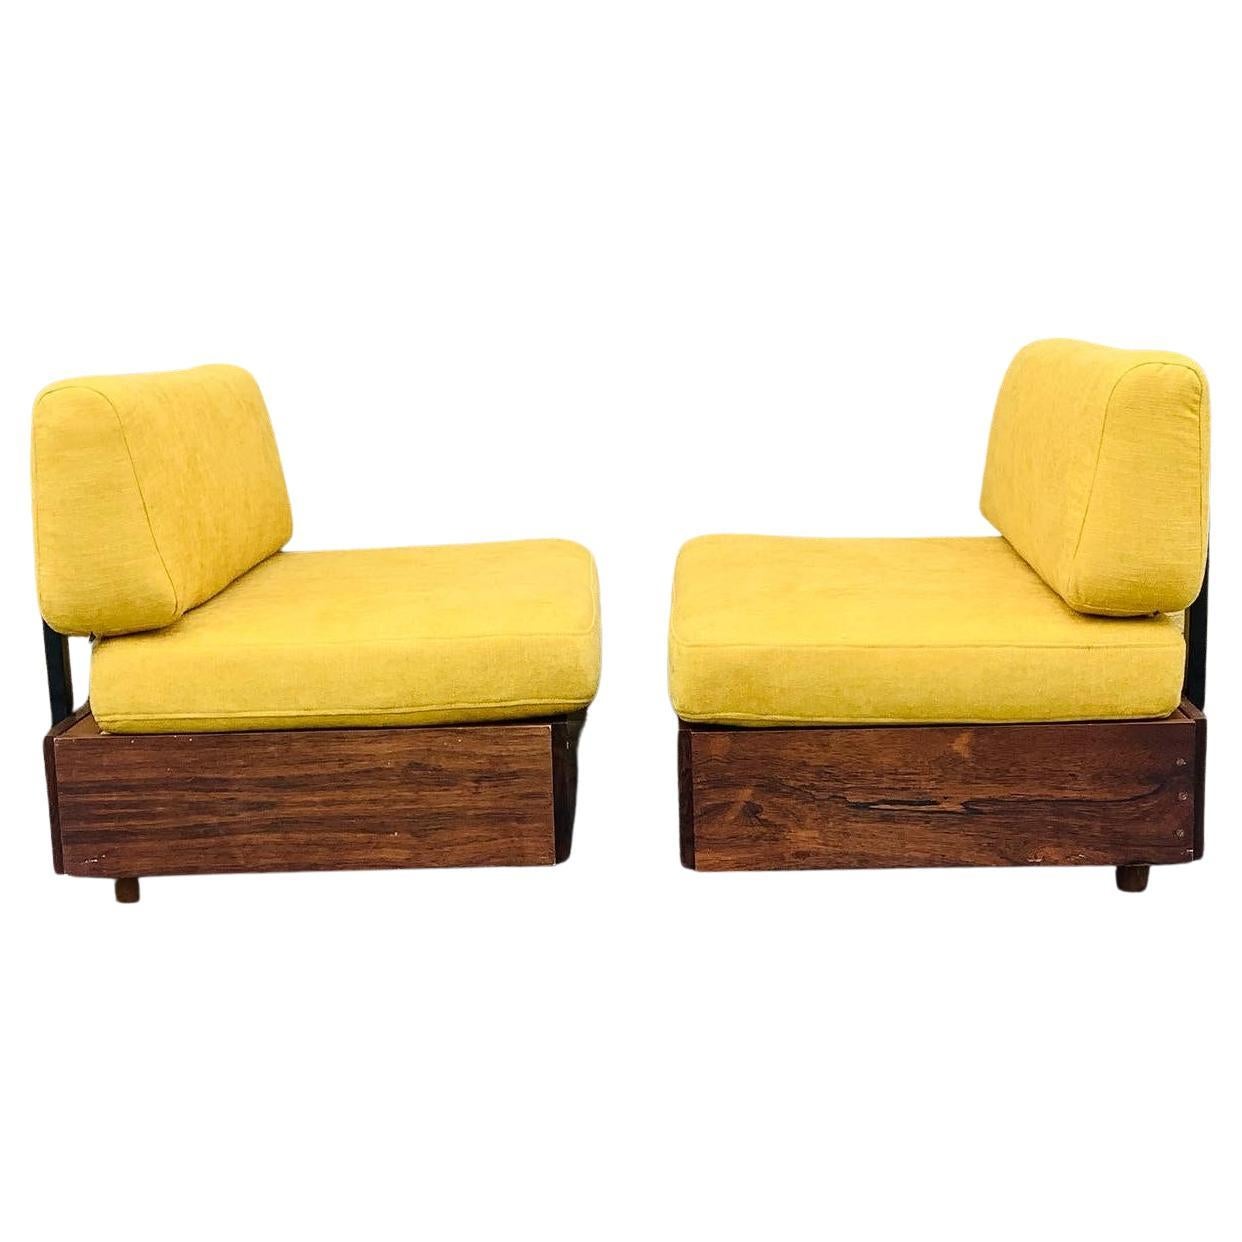 Two early Verner Panton ‘Studioline’ sofa /daybed modules designed in 1961 and produced by France & Søn. Wooden frame with legs in front and wheels behind. Cushions in yellow cotton fabric. Storage under the seating. L. 100 D. 67 cm. Has a little